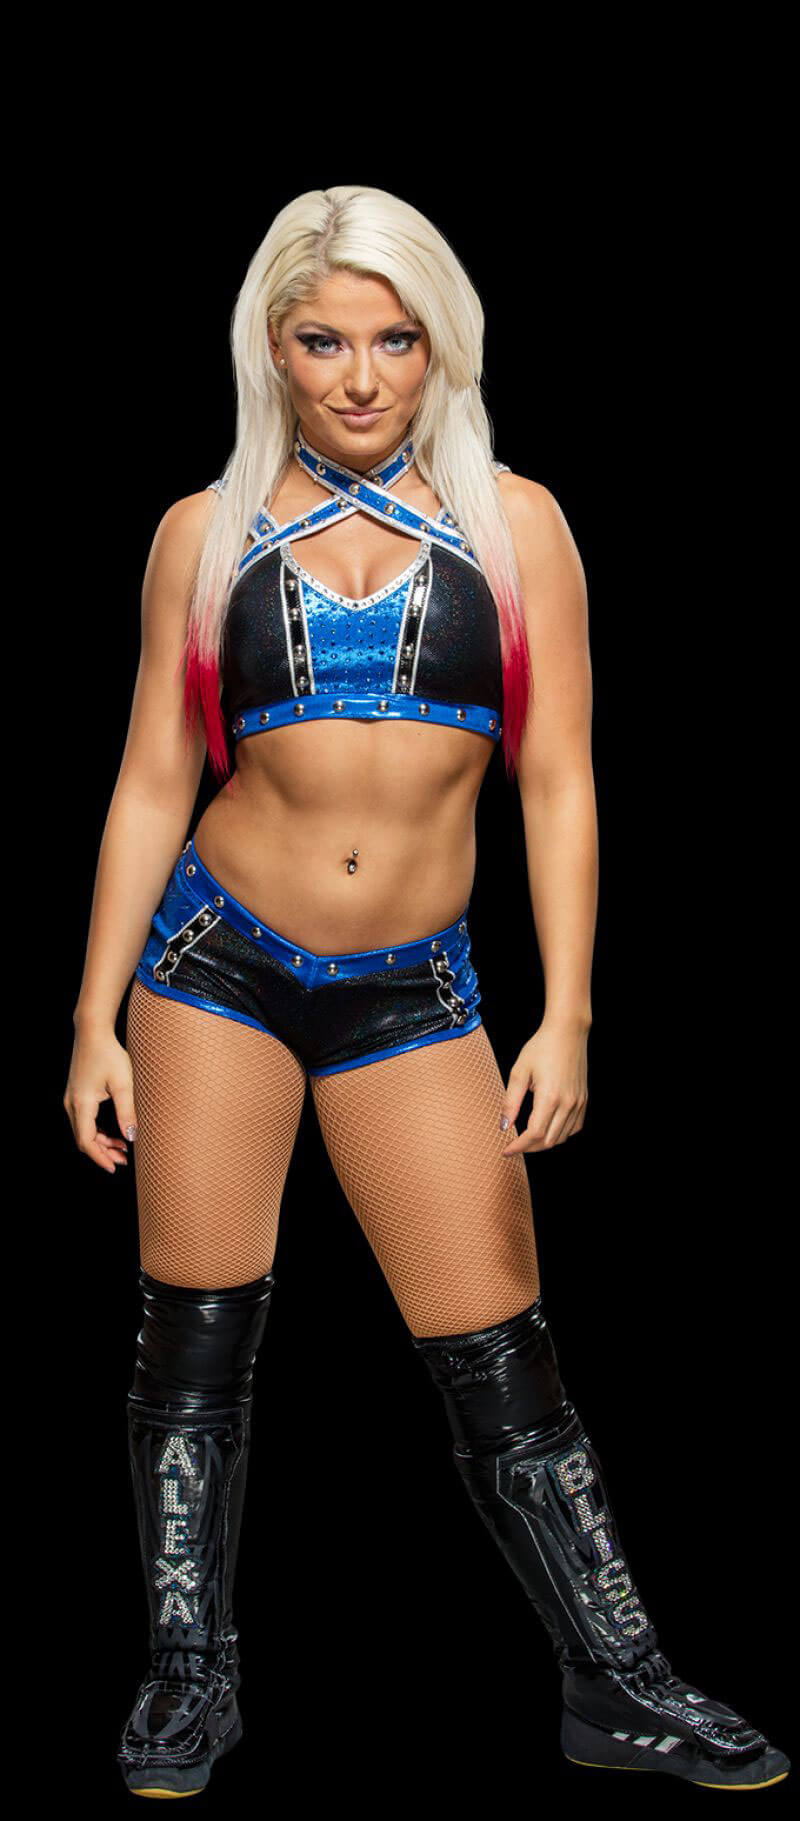 WWE - Alexa Bliss Profile Pictures